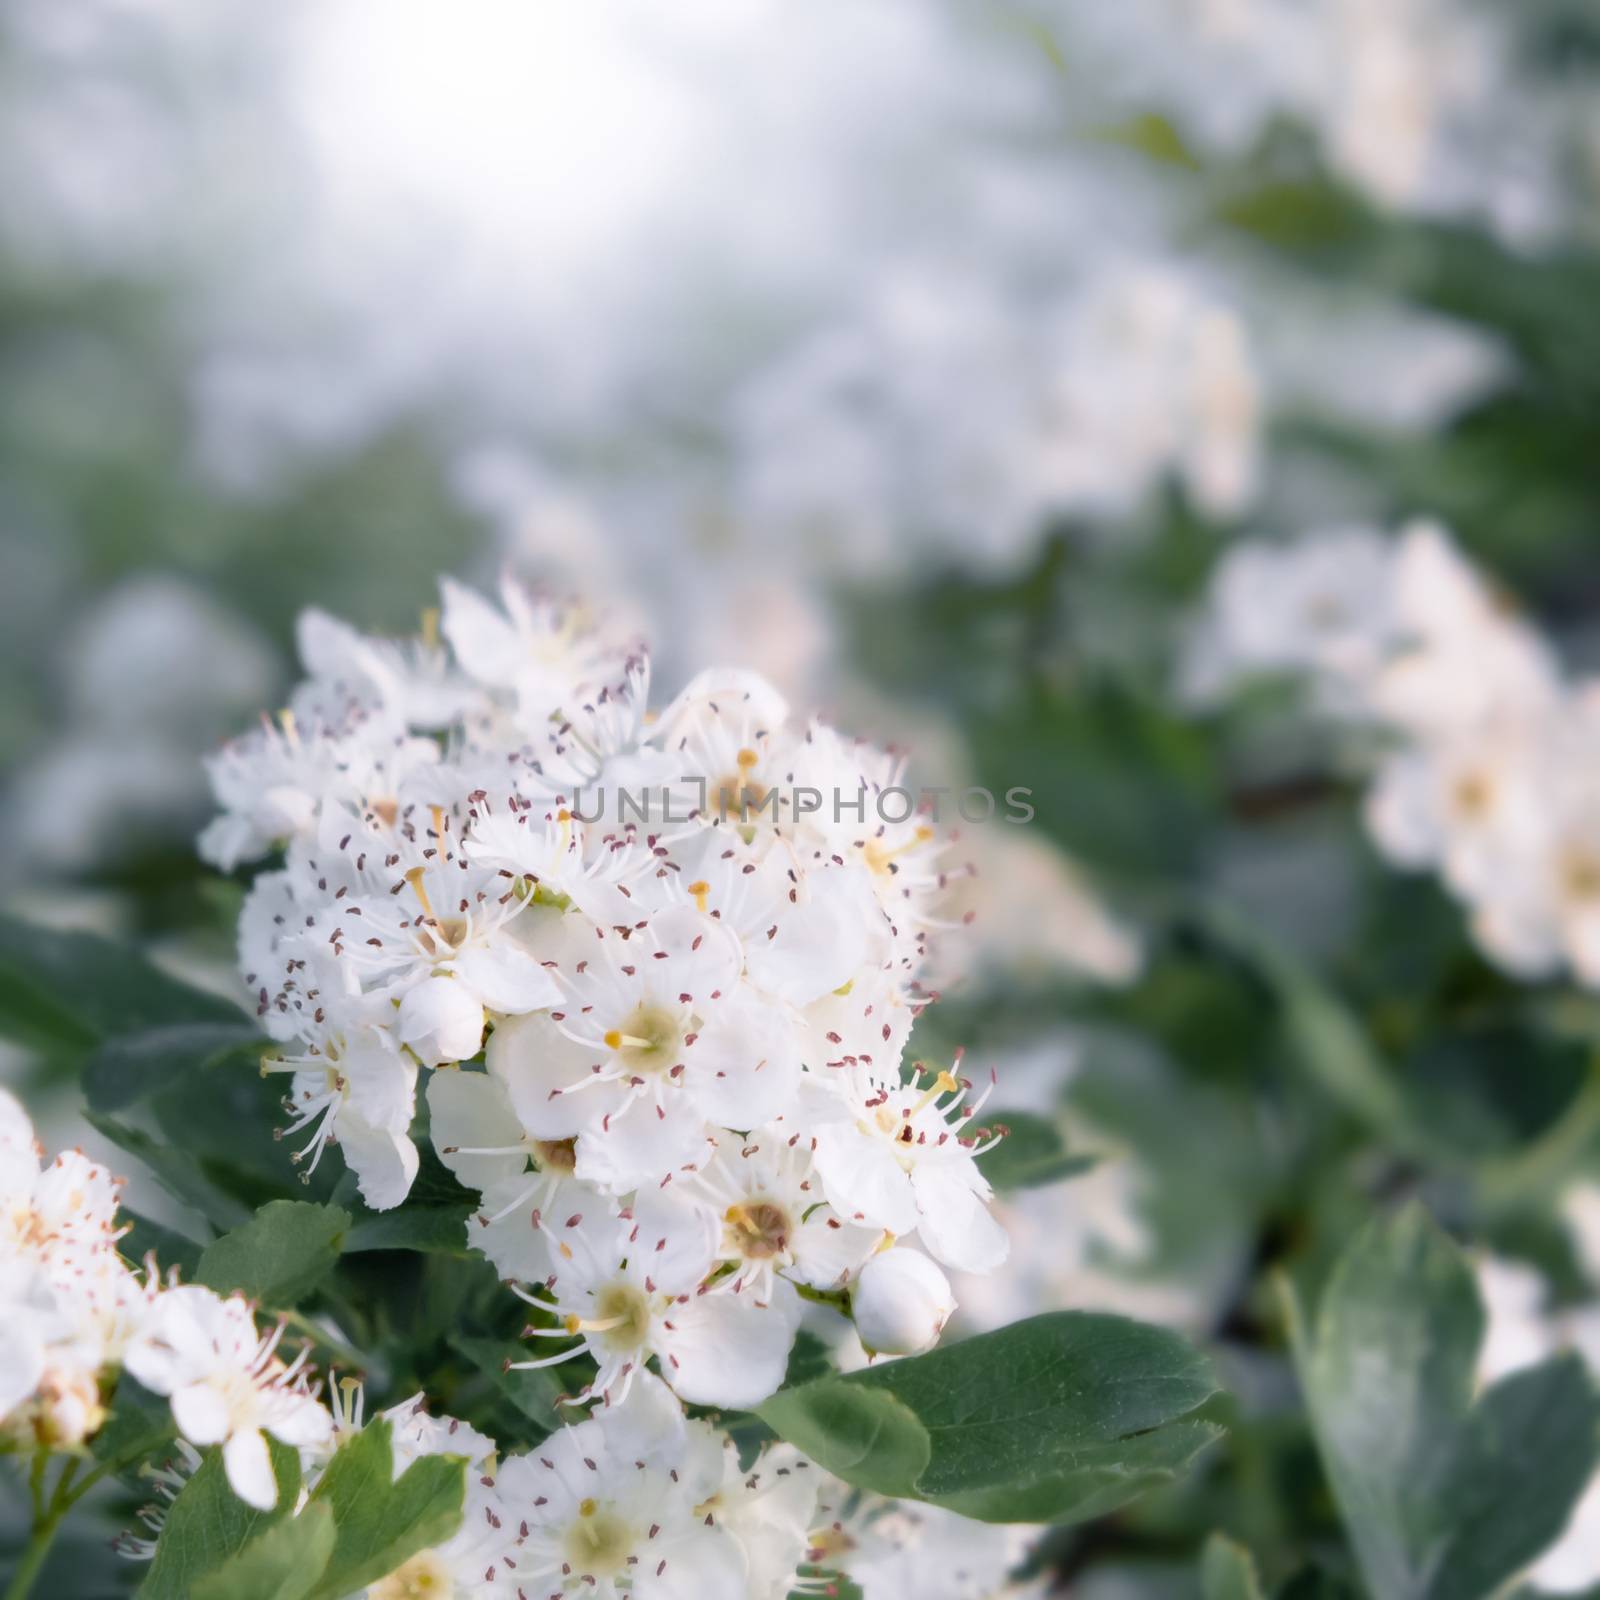 Delicate white flowers of hawthorn in the spring garden, close-up by galsand